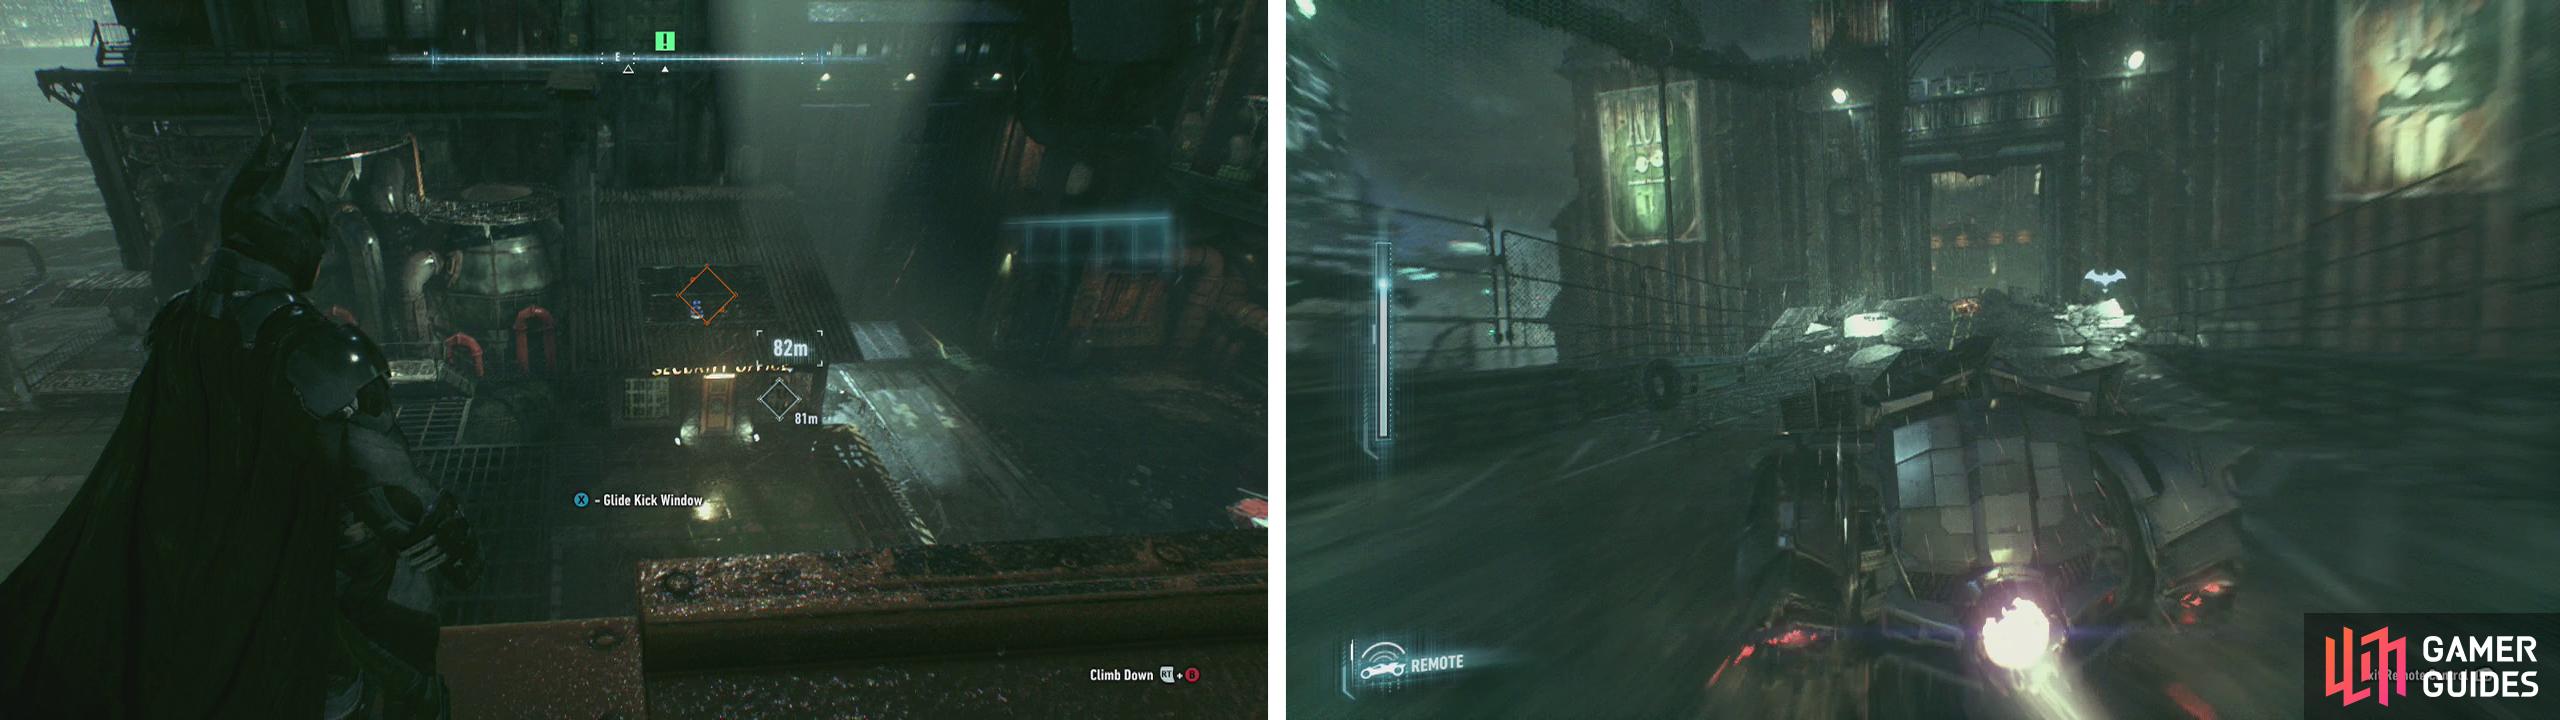 Crash through the window near the gate (left) and use the lever inside. Jump the gap with the Batmobile to enter the compound (right).